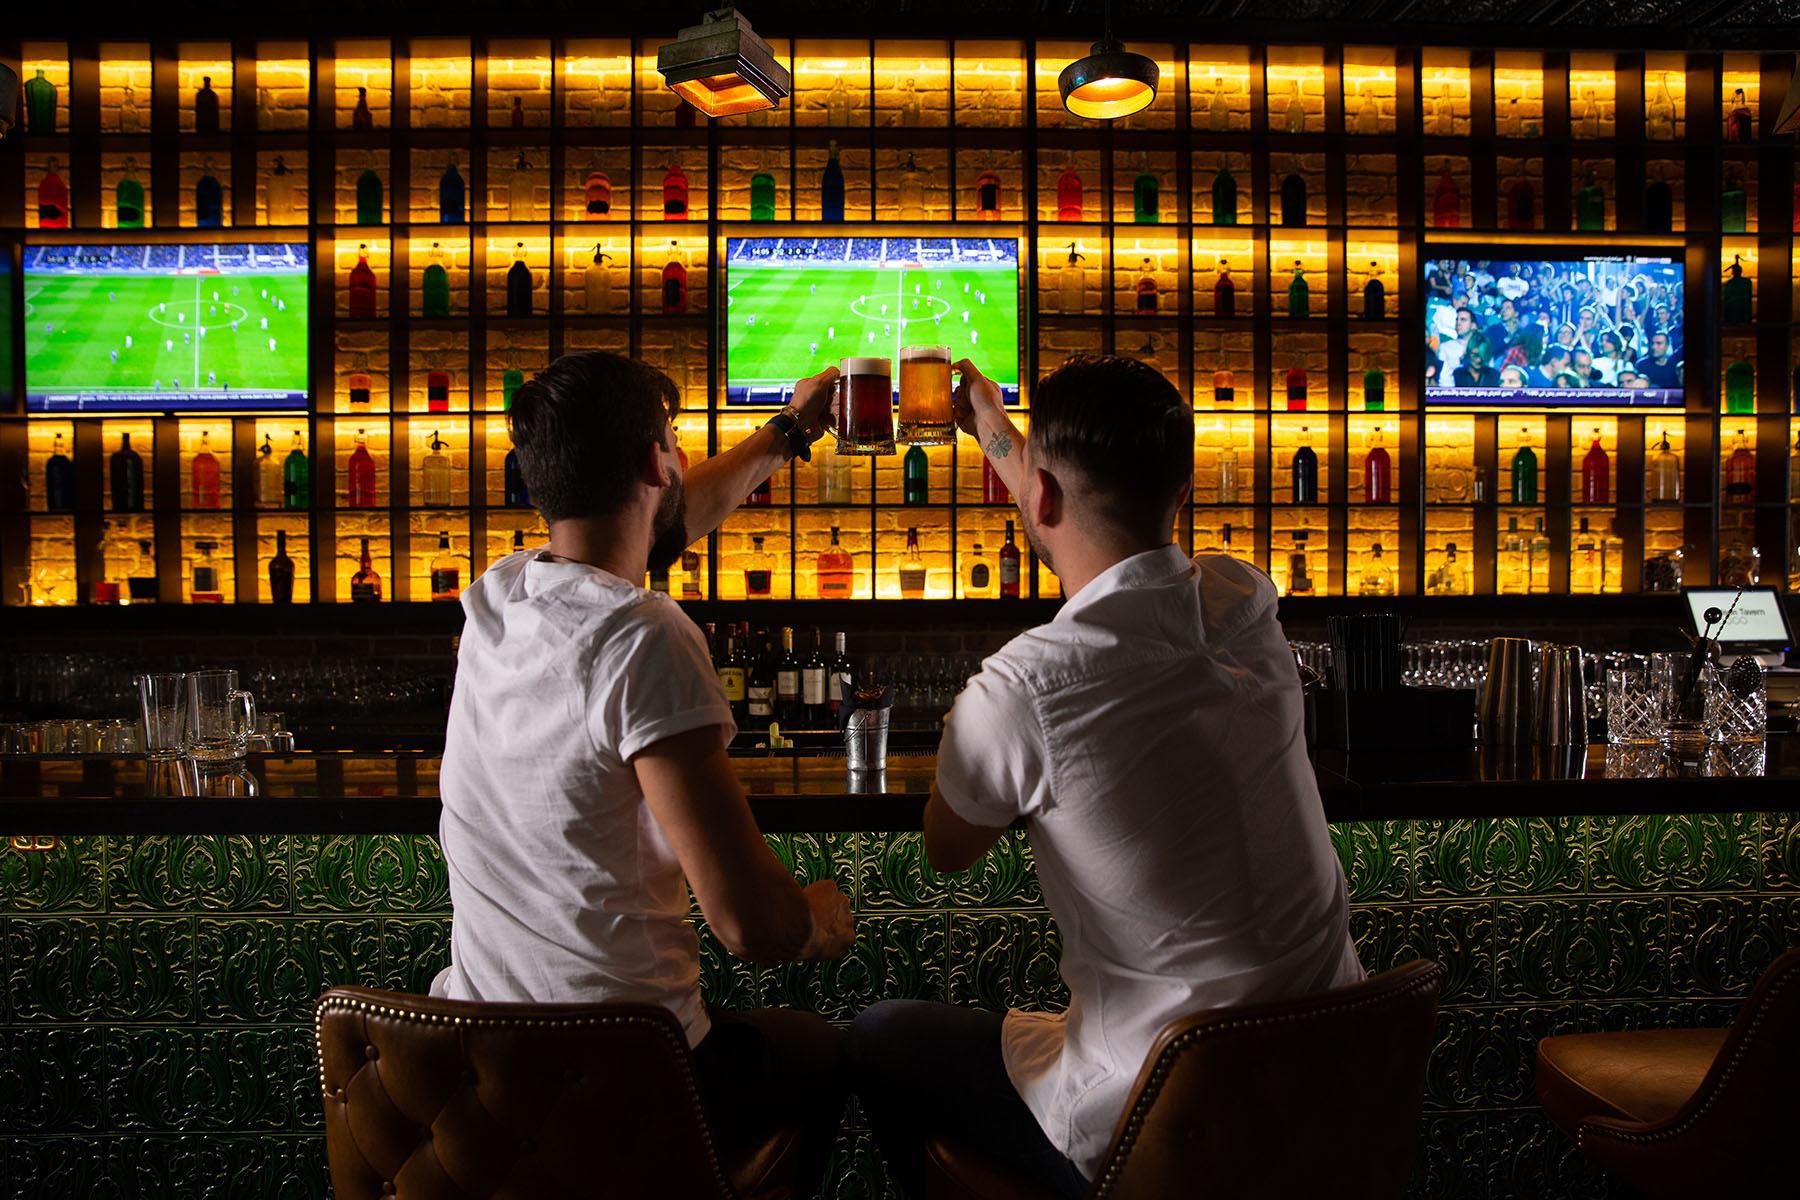 Men cheers at bar with soccer game on in background